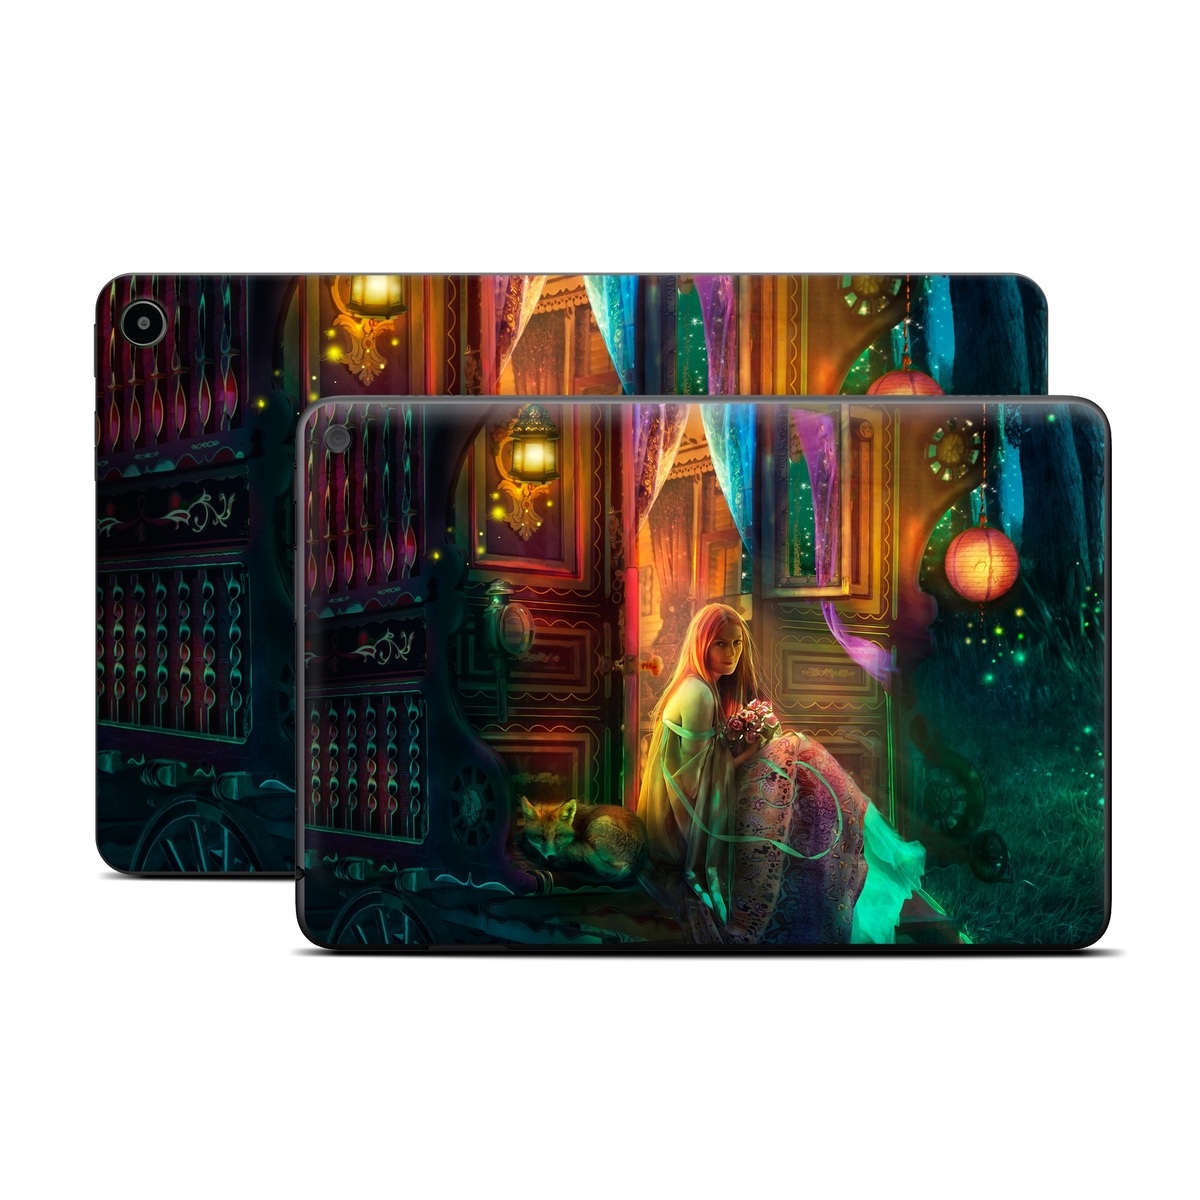 Amazon Fire Tablet Series Skin Skin design of Illustration, Adventure game, Darkness, Art, Digital compositing, Fictional character, Games, with black, red, blue, green colors